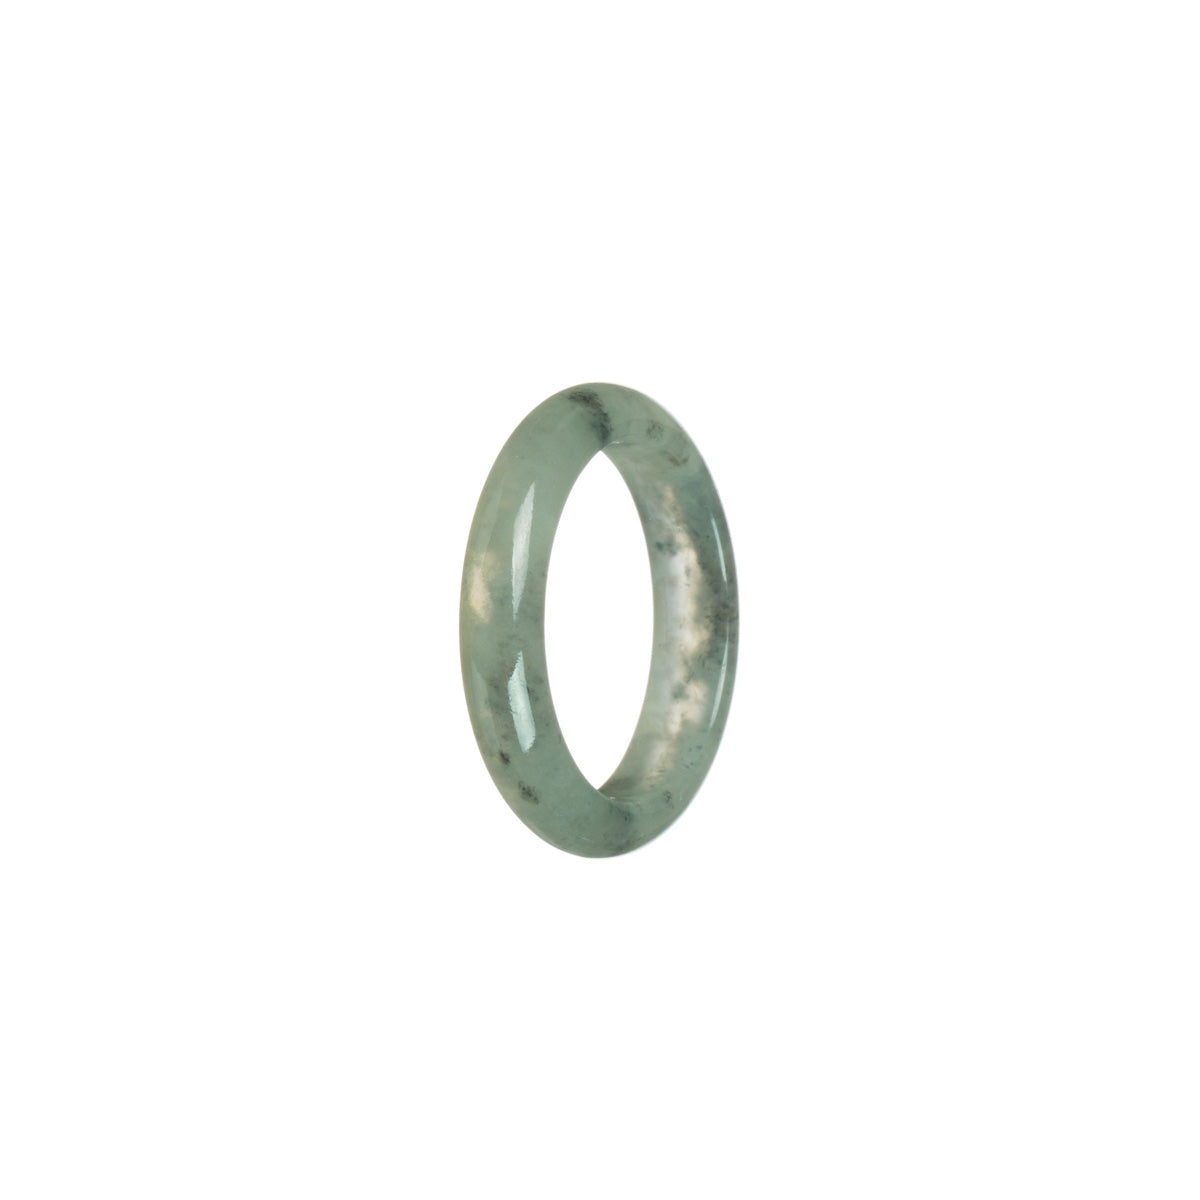 Genuine Icy Greyish green with grey Jade Ring - Size S